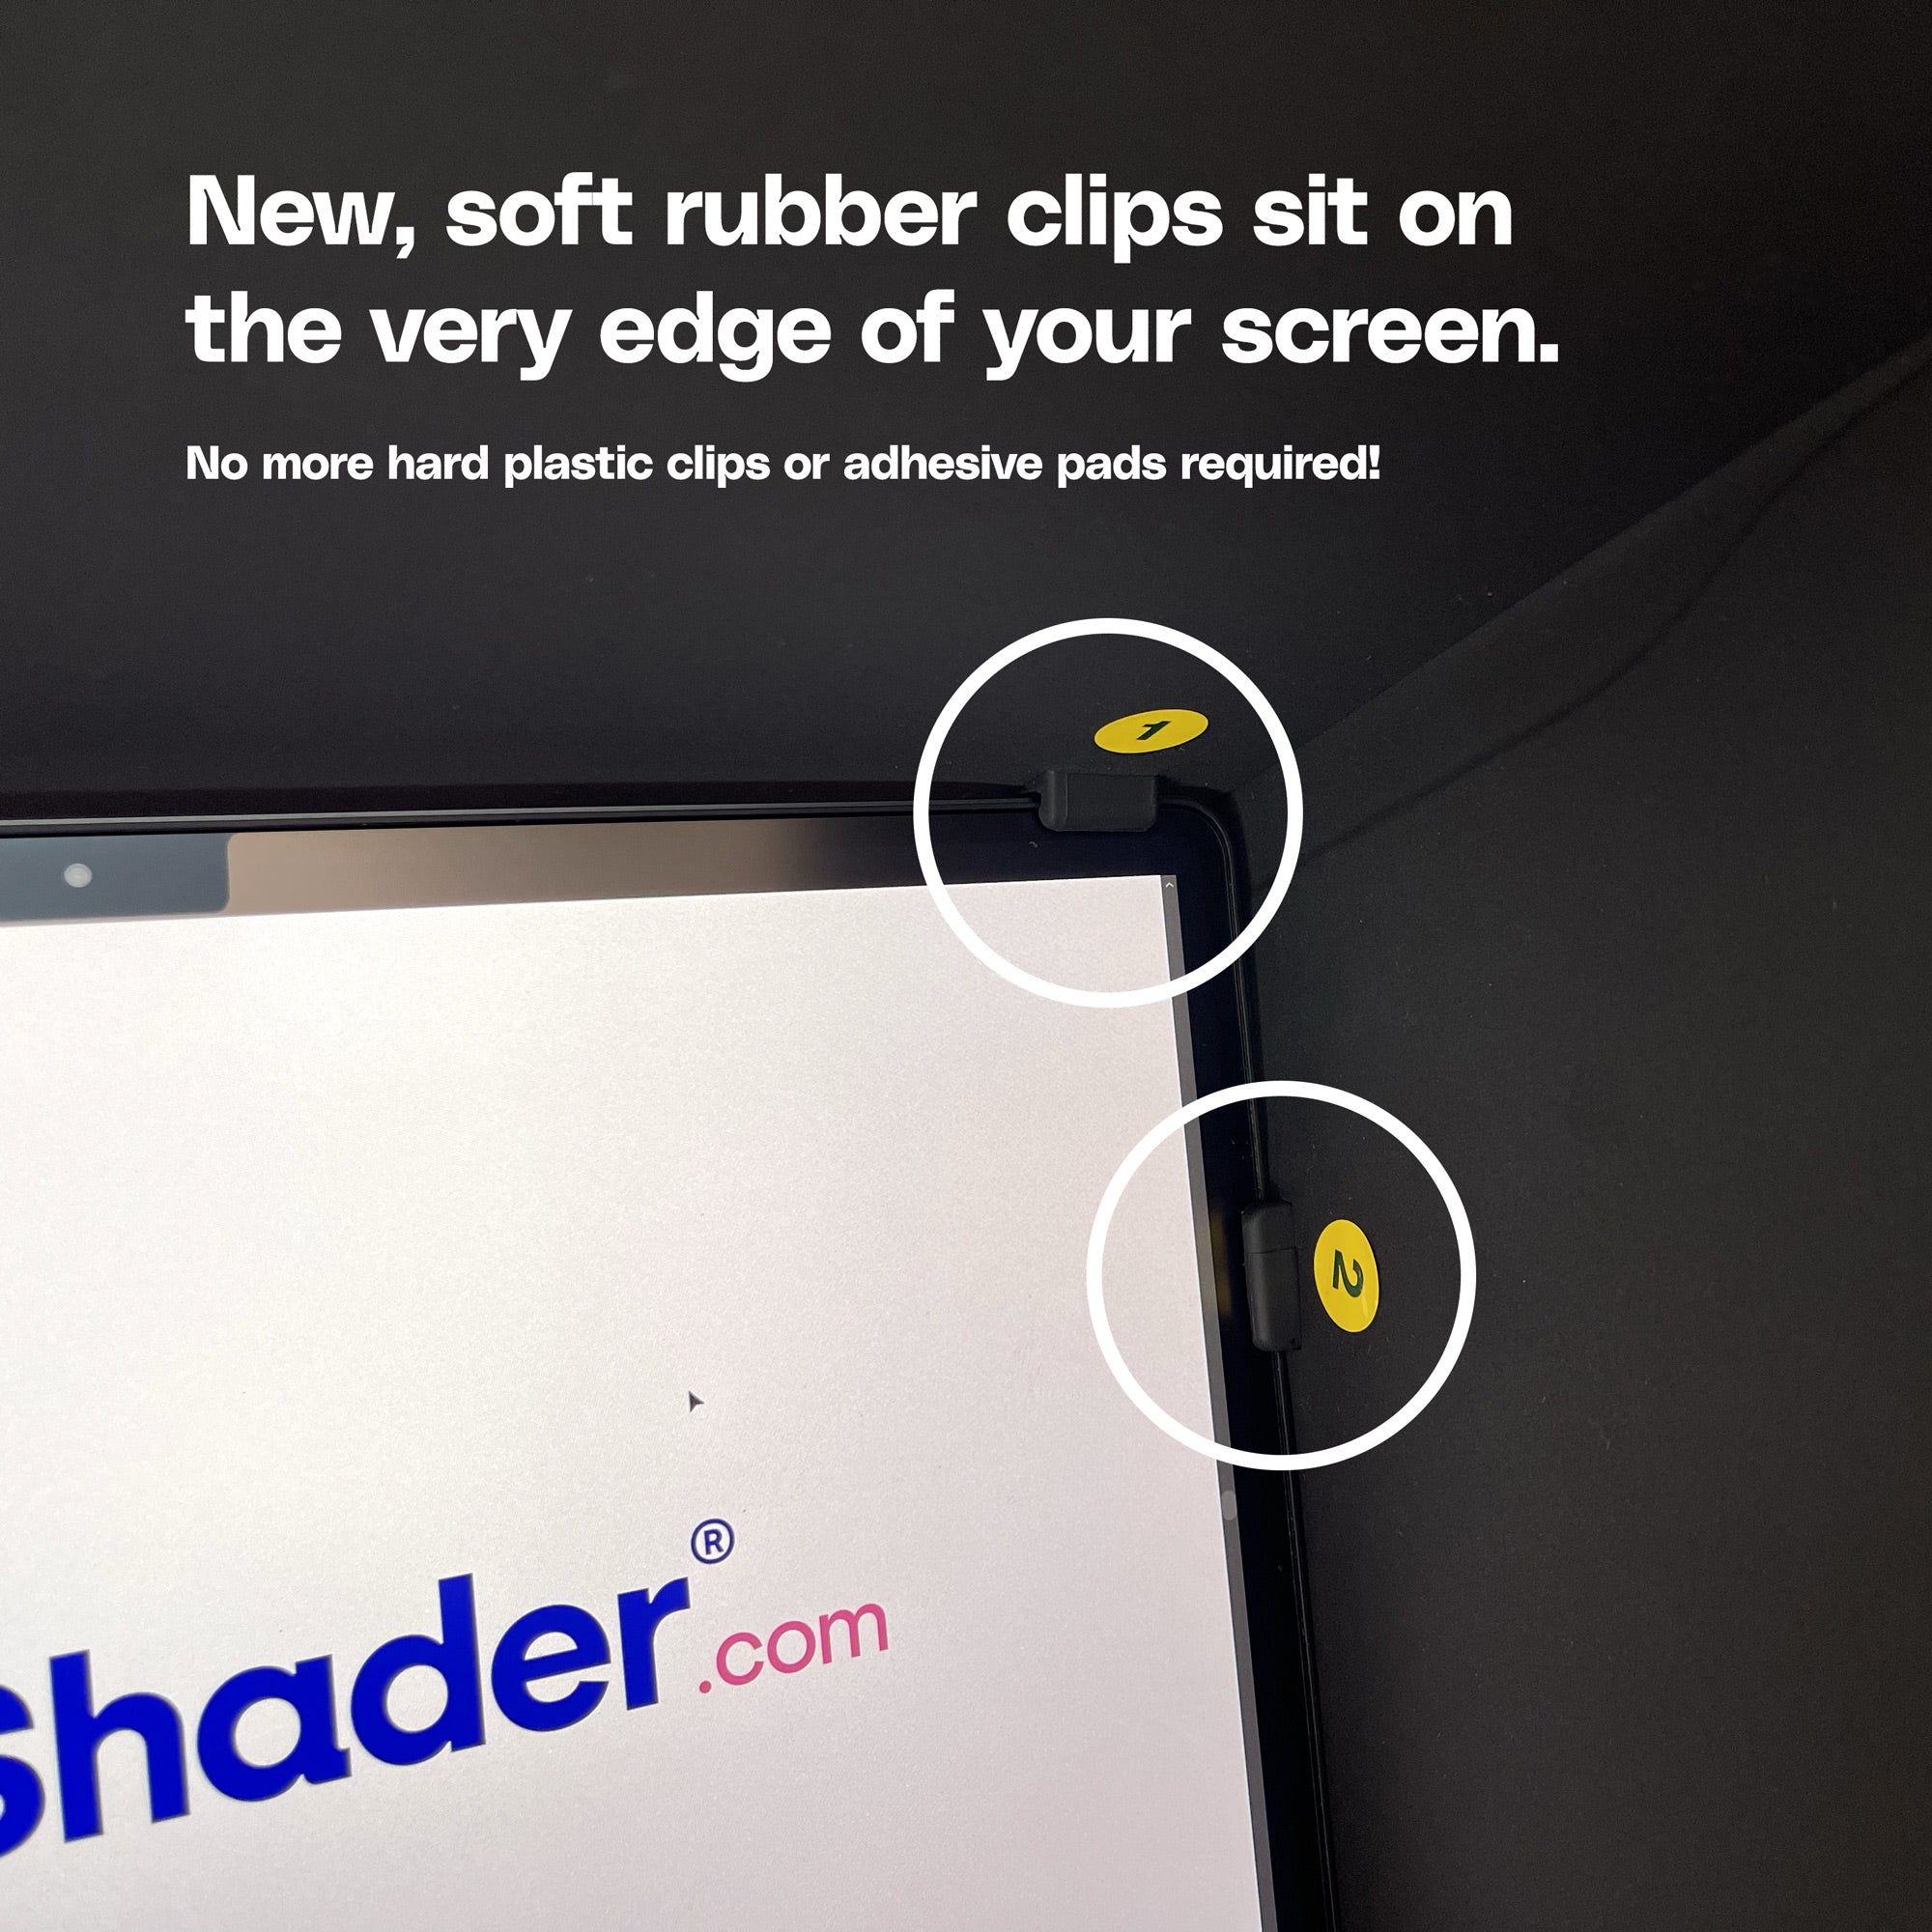 SunShader 4 features new soft rubber clips that sit on the very edge of your screen.